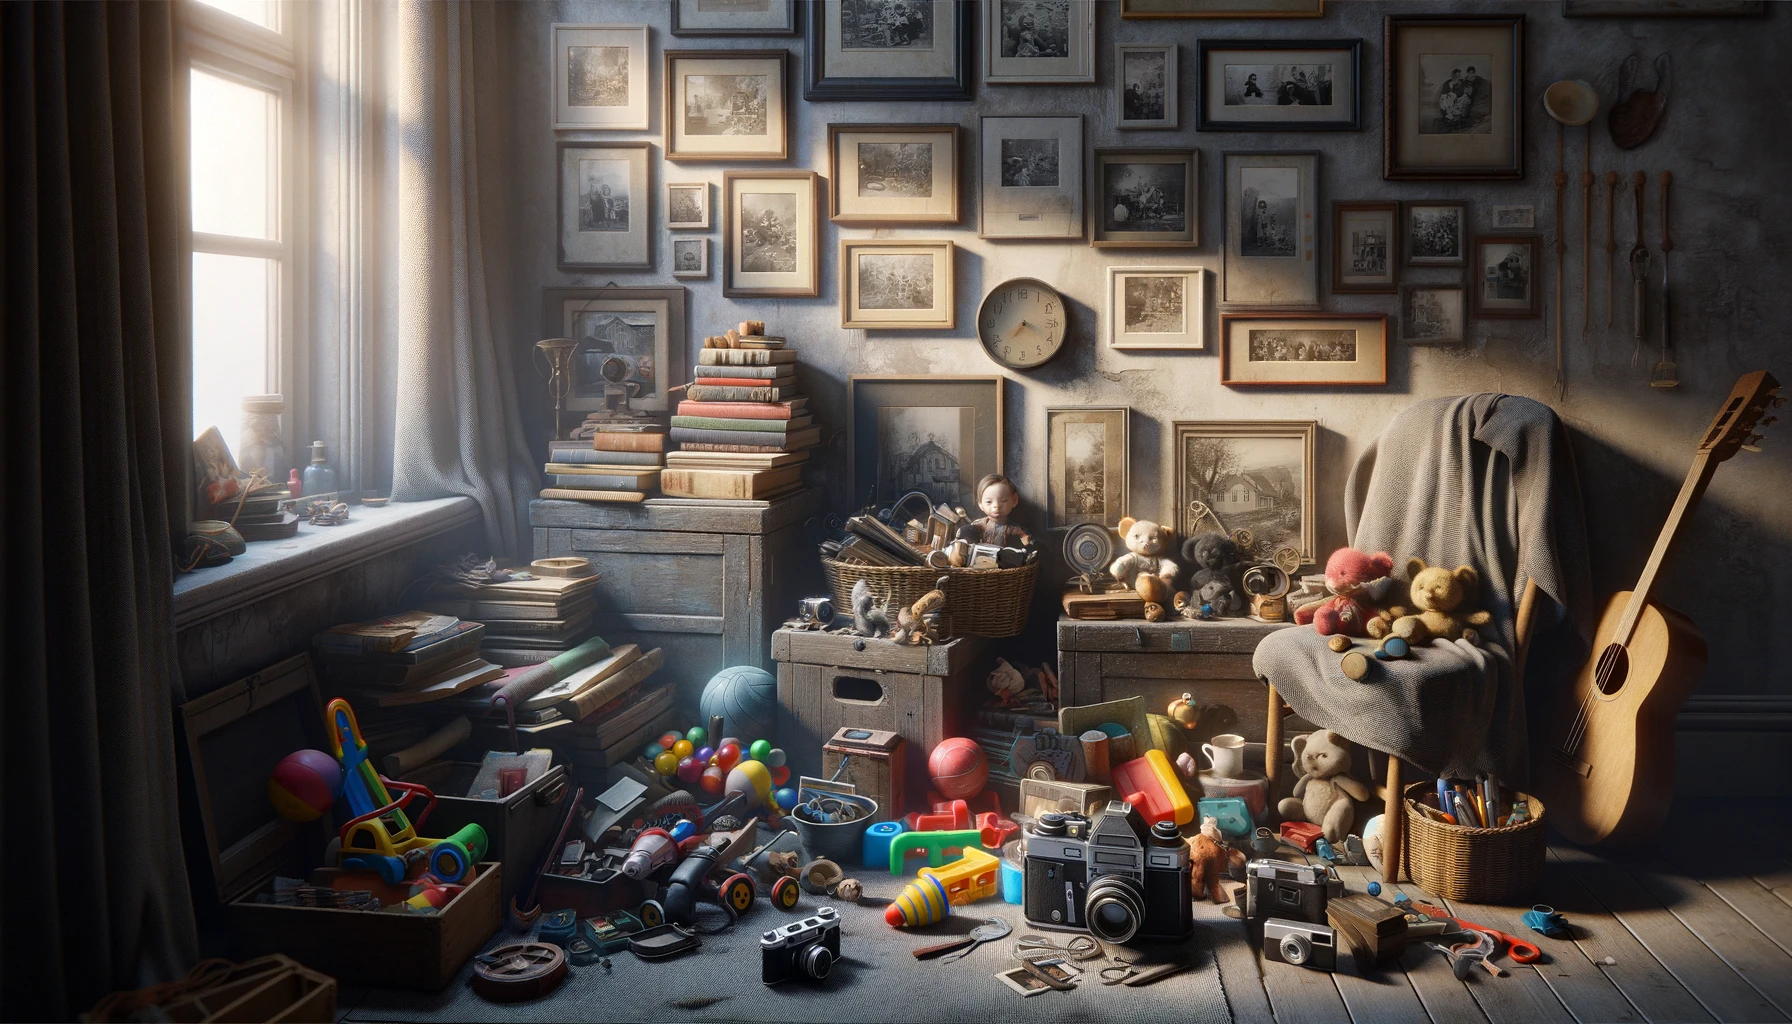 A cozy, cluttered corner of a room, filled with items that narrate a personal history. There are old toys, worn books, a vintage camera, and family photos in various frames, all bathed in soft natural light. The scene captures a sense of warmth and depth, highlighting the complex emotions tied to these possessions.